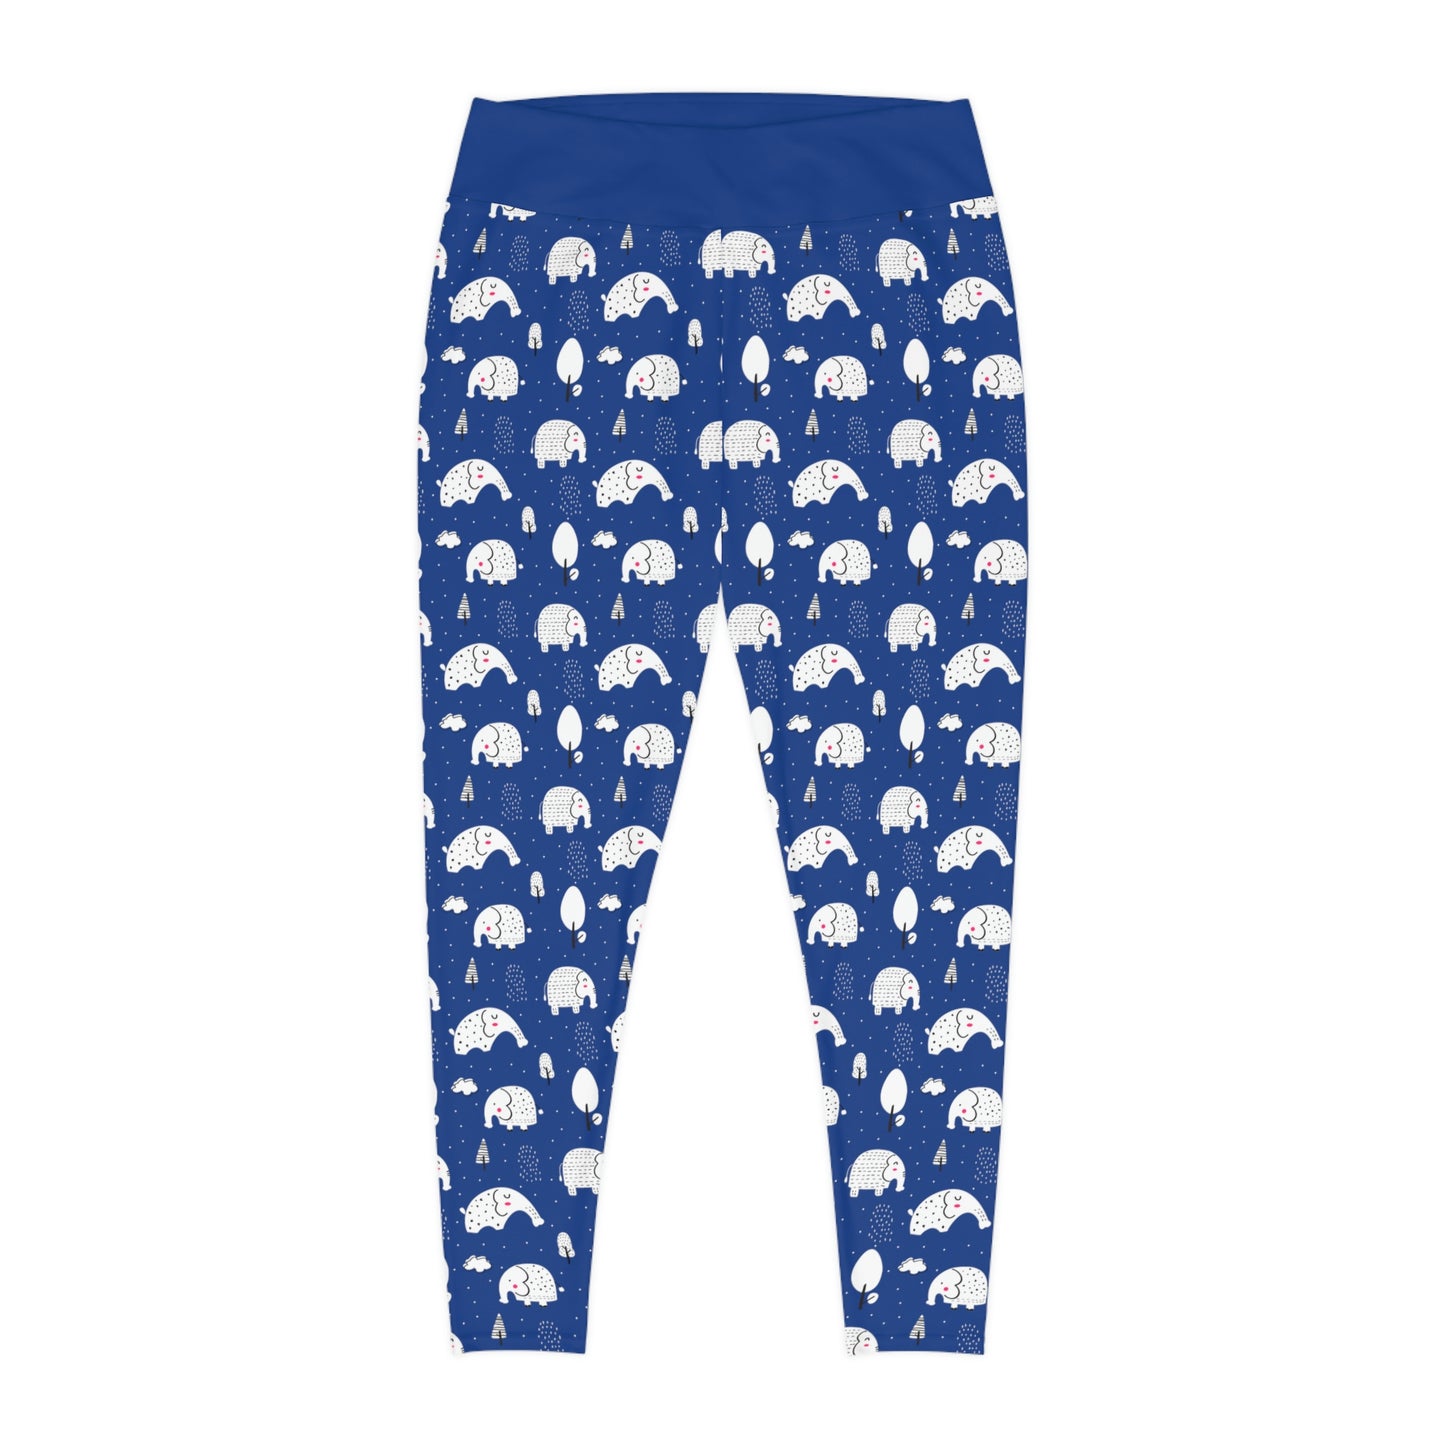 Elephant Safari Animal Plus Size Leggings One of a Kind Unique Workout Activewear tights for Mom fitness, Mothers Day, Girlfriend Christmas Gift